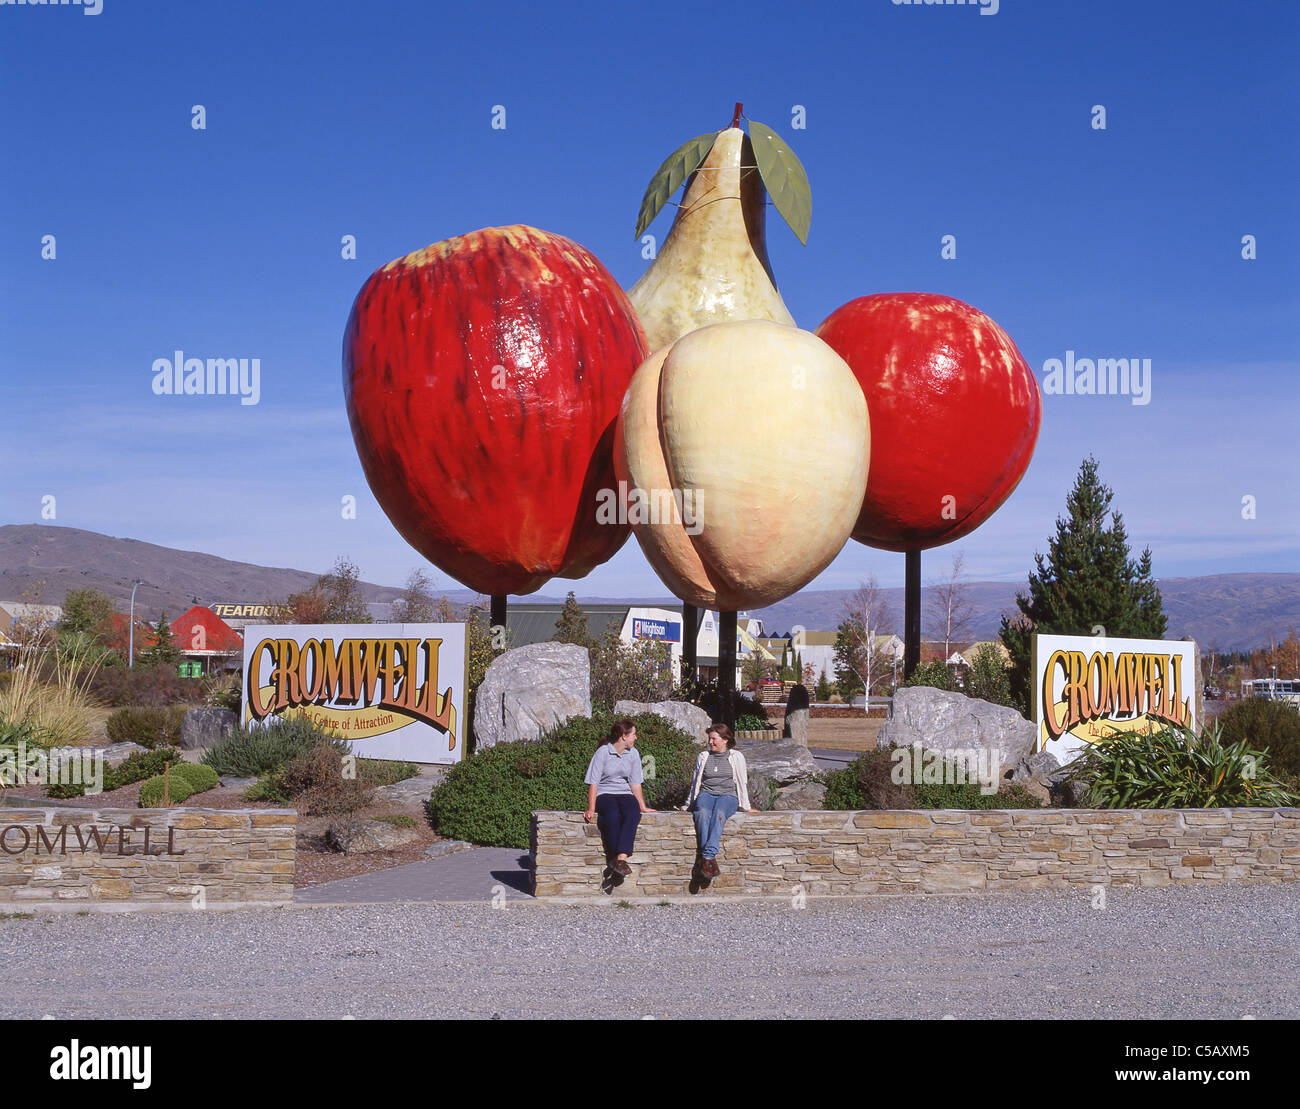 Giant Fruit Sculpture And Welcome Sign Cromwell Otago Region South